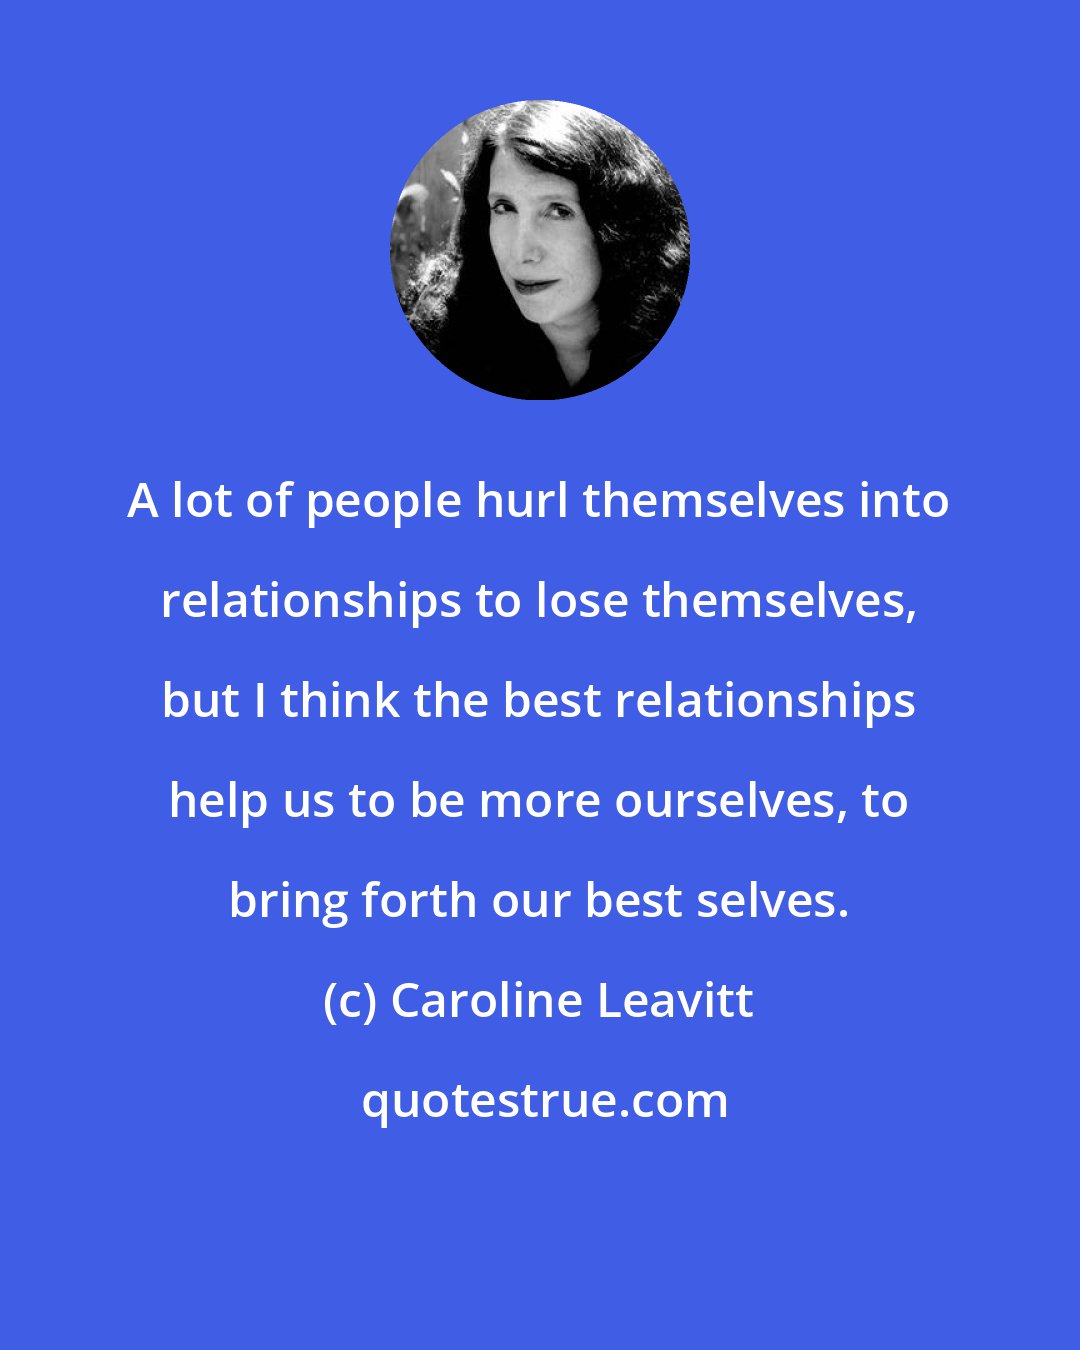 Caroline Leavitt: A lot of people hurl themselves into relationships to lose themselves, but I think the best relationships help us to be more ourselves, to bring forth our best selves.